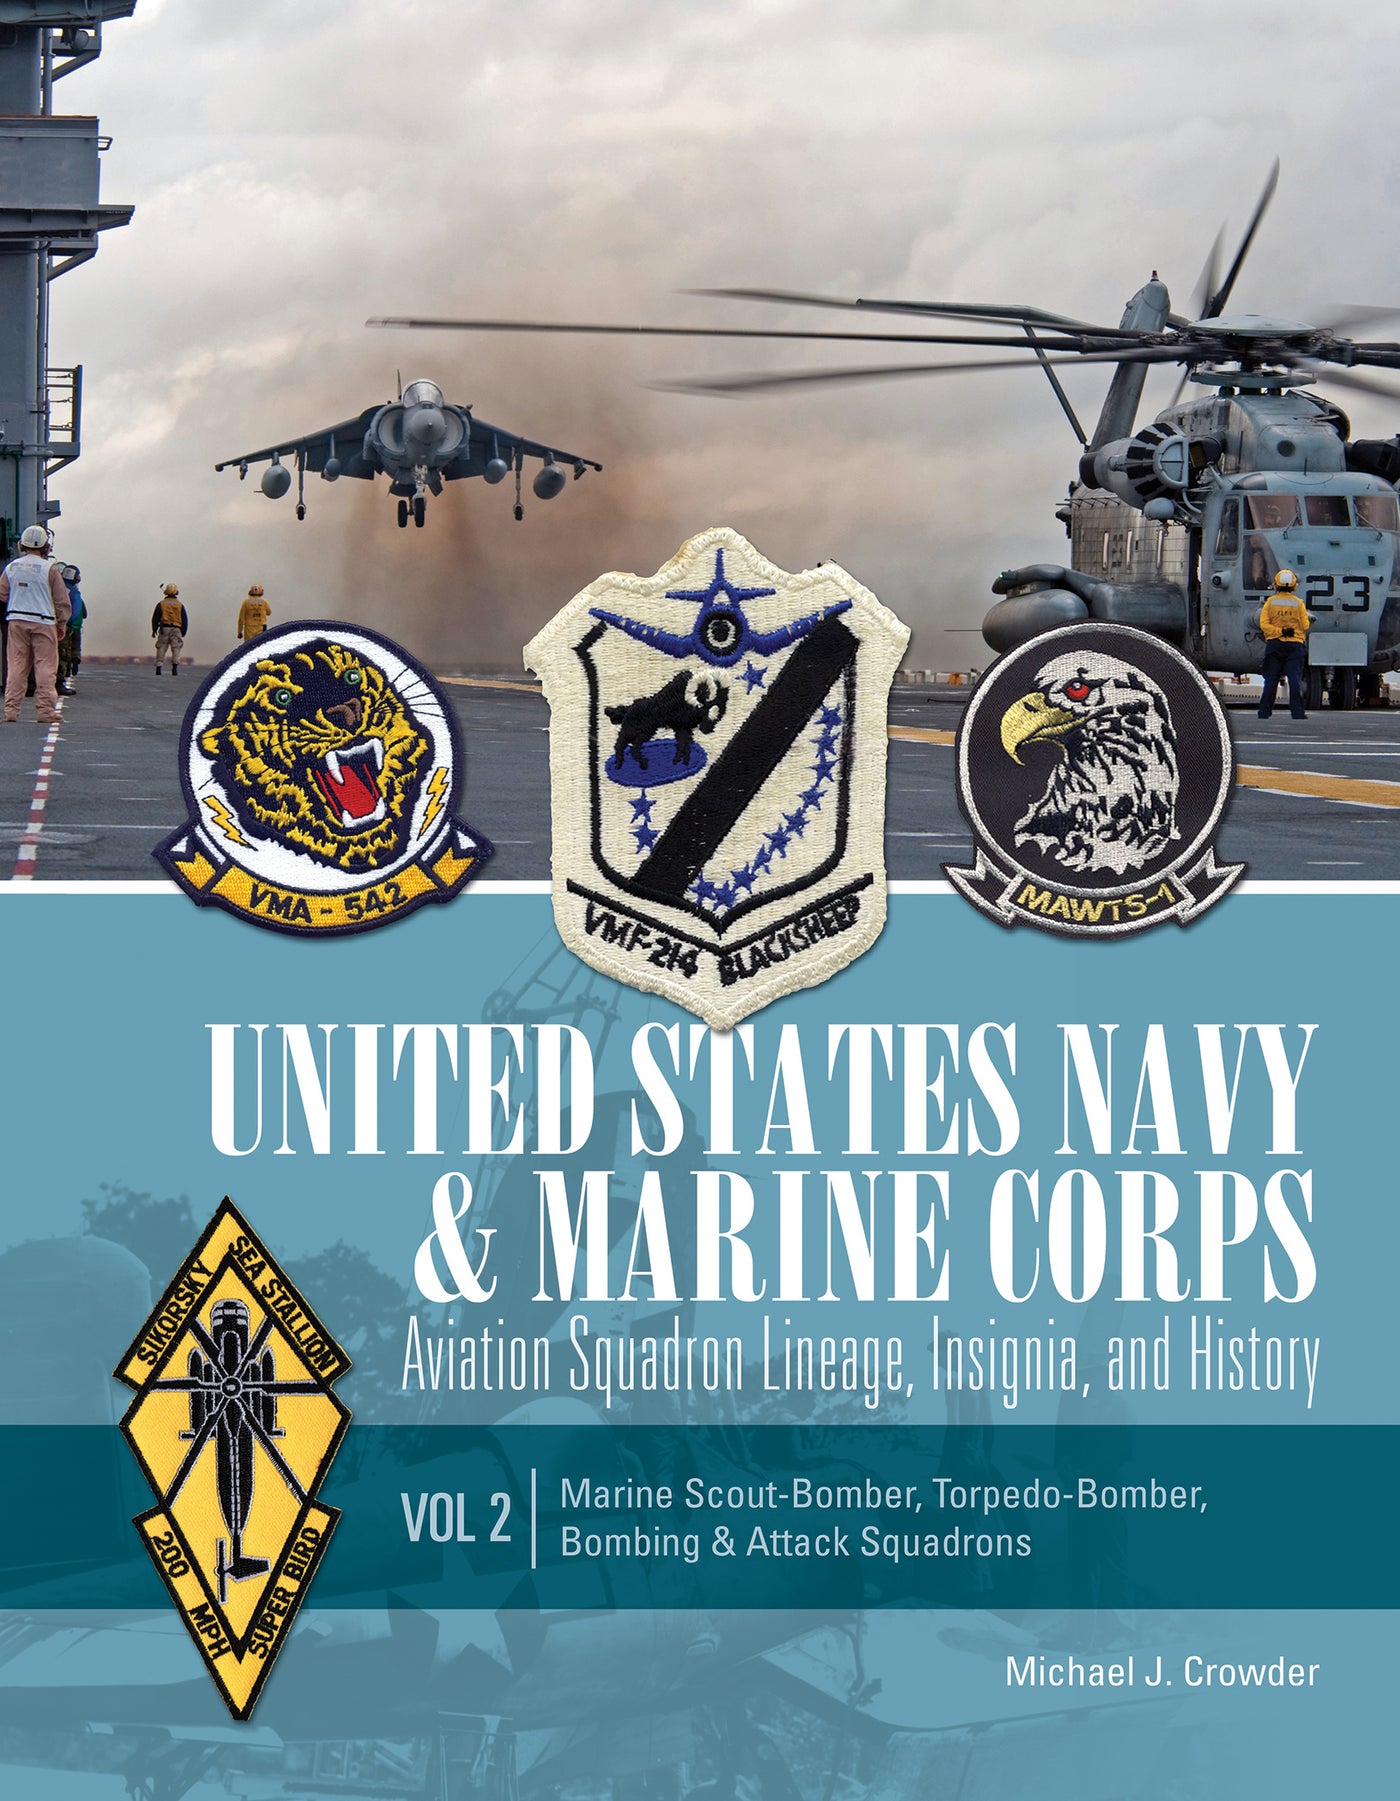 United States Navy and Marine Corps Aviation Squadron Lineage, Insignia, and History